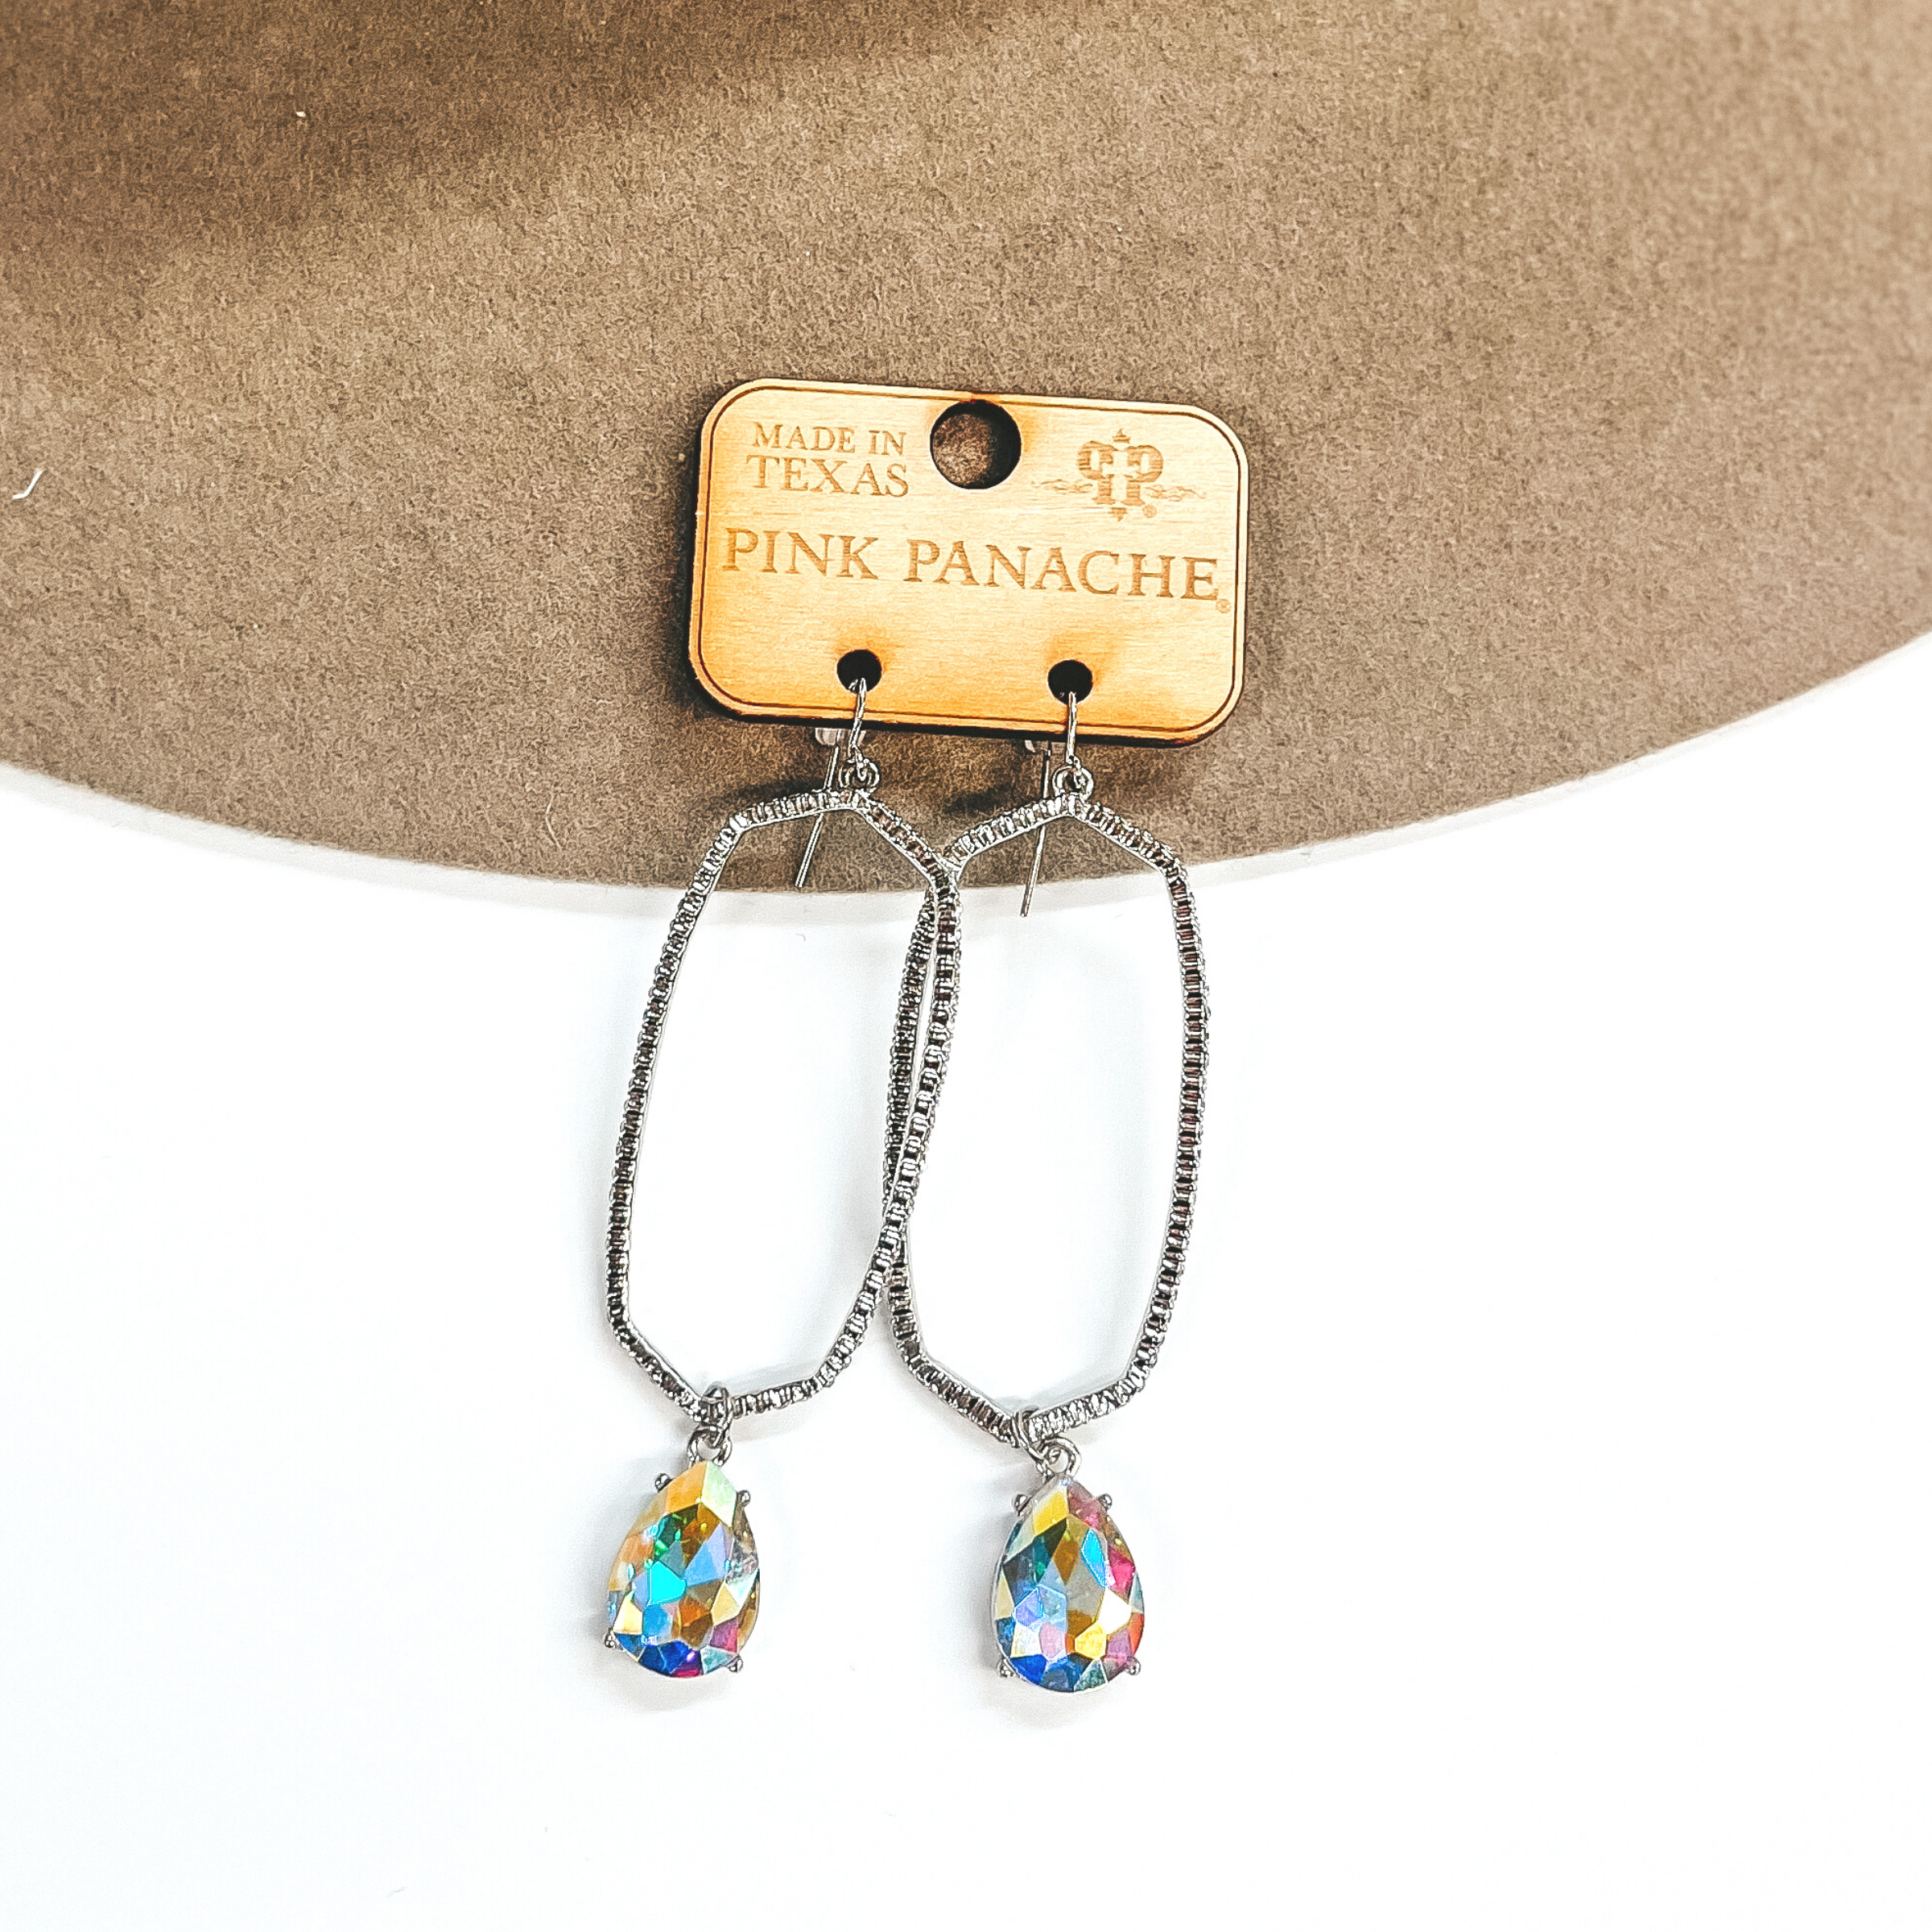 A pair of oval outline earrings that have crystals all the way around. These earrings have an AB crystal teardrop pendant at the bottom of each earring. Pictured on white background with a beige hat. 